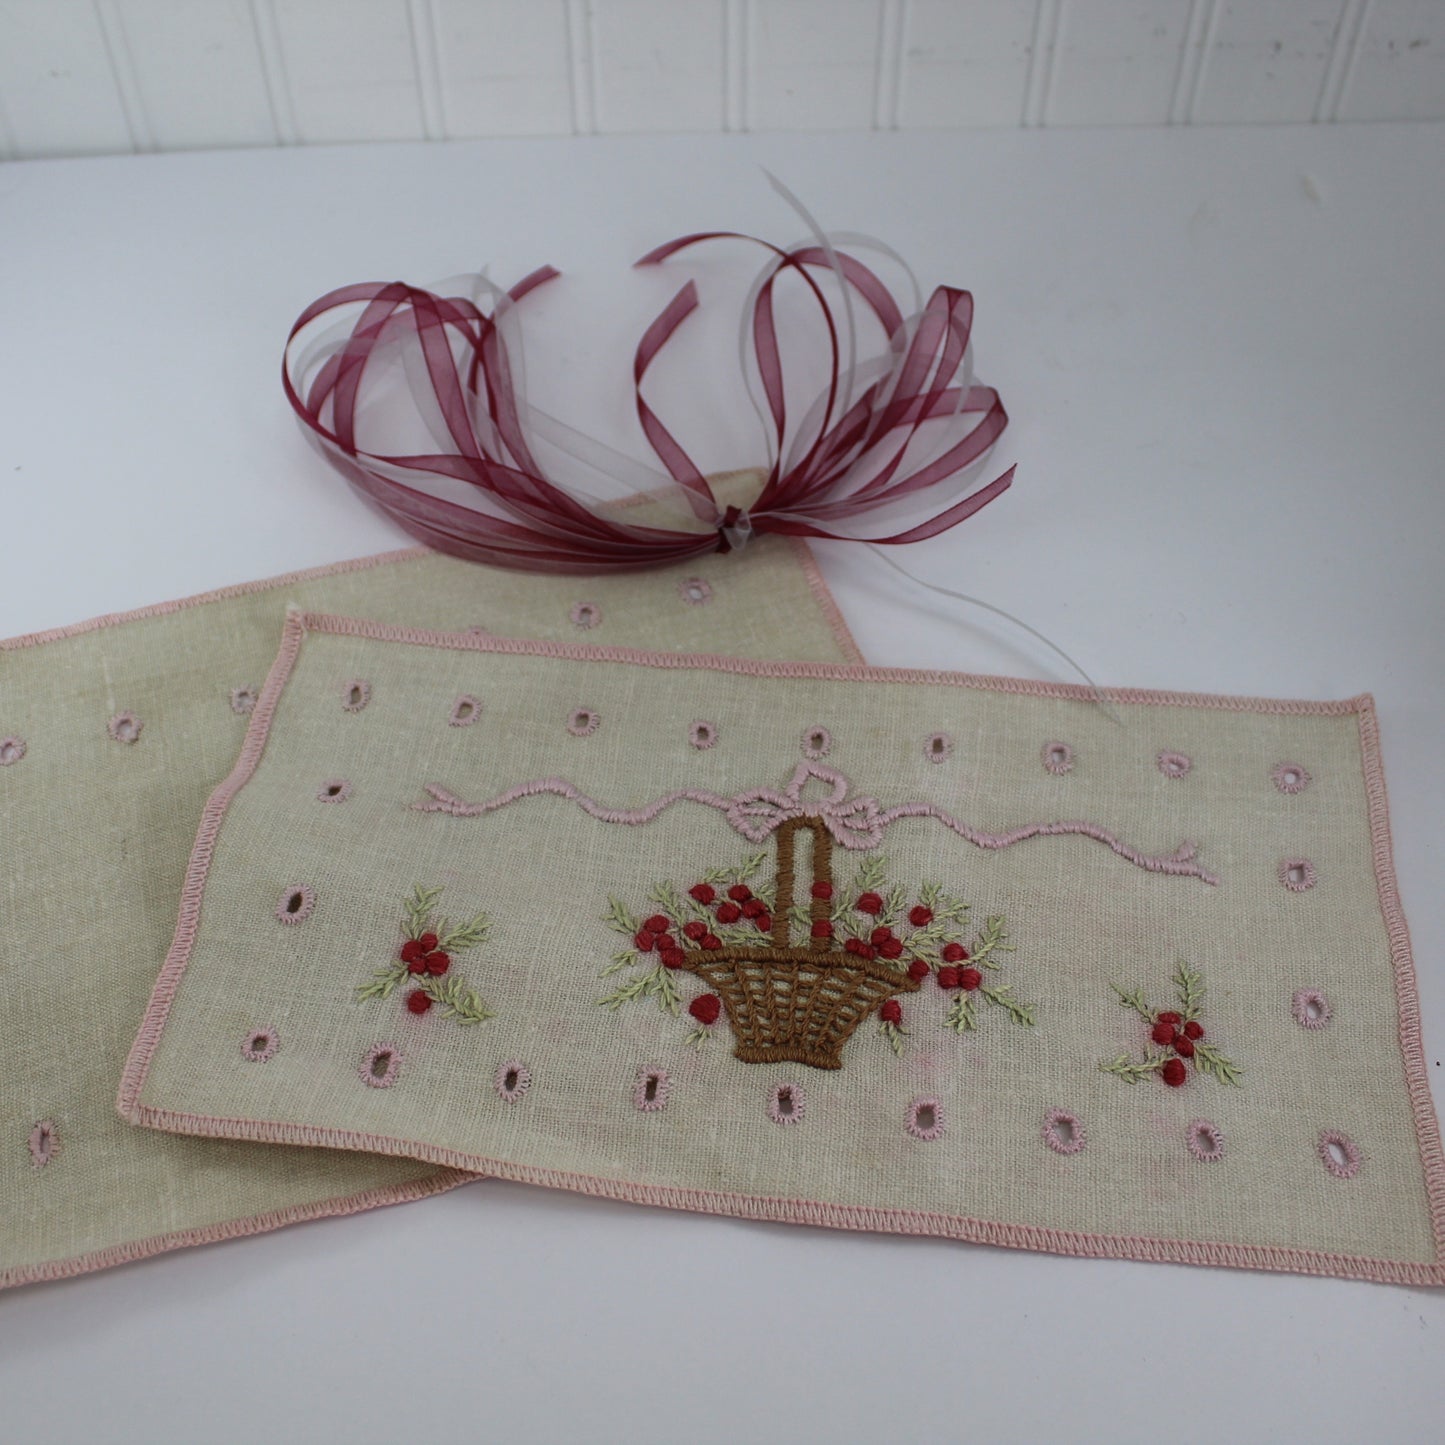 Small Intricately Embroidered Pillow Case Pin Cushion Sachet pillow cushion closeup holes for threading ribbon closure